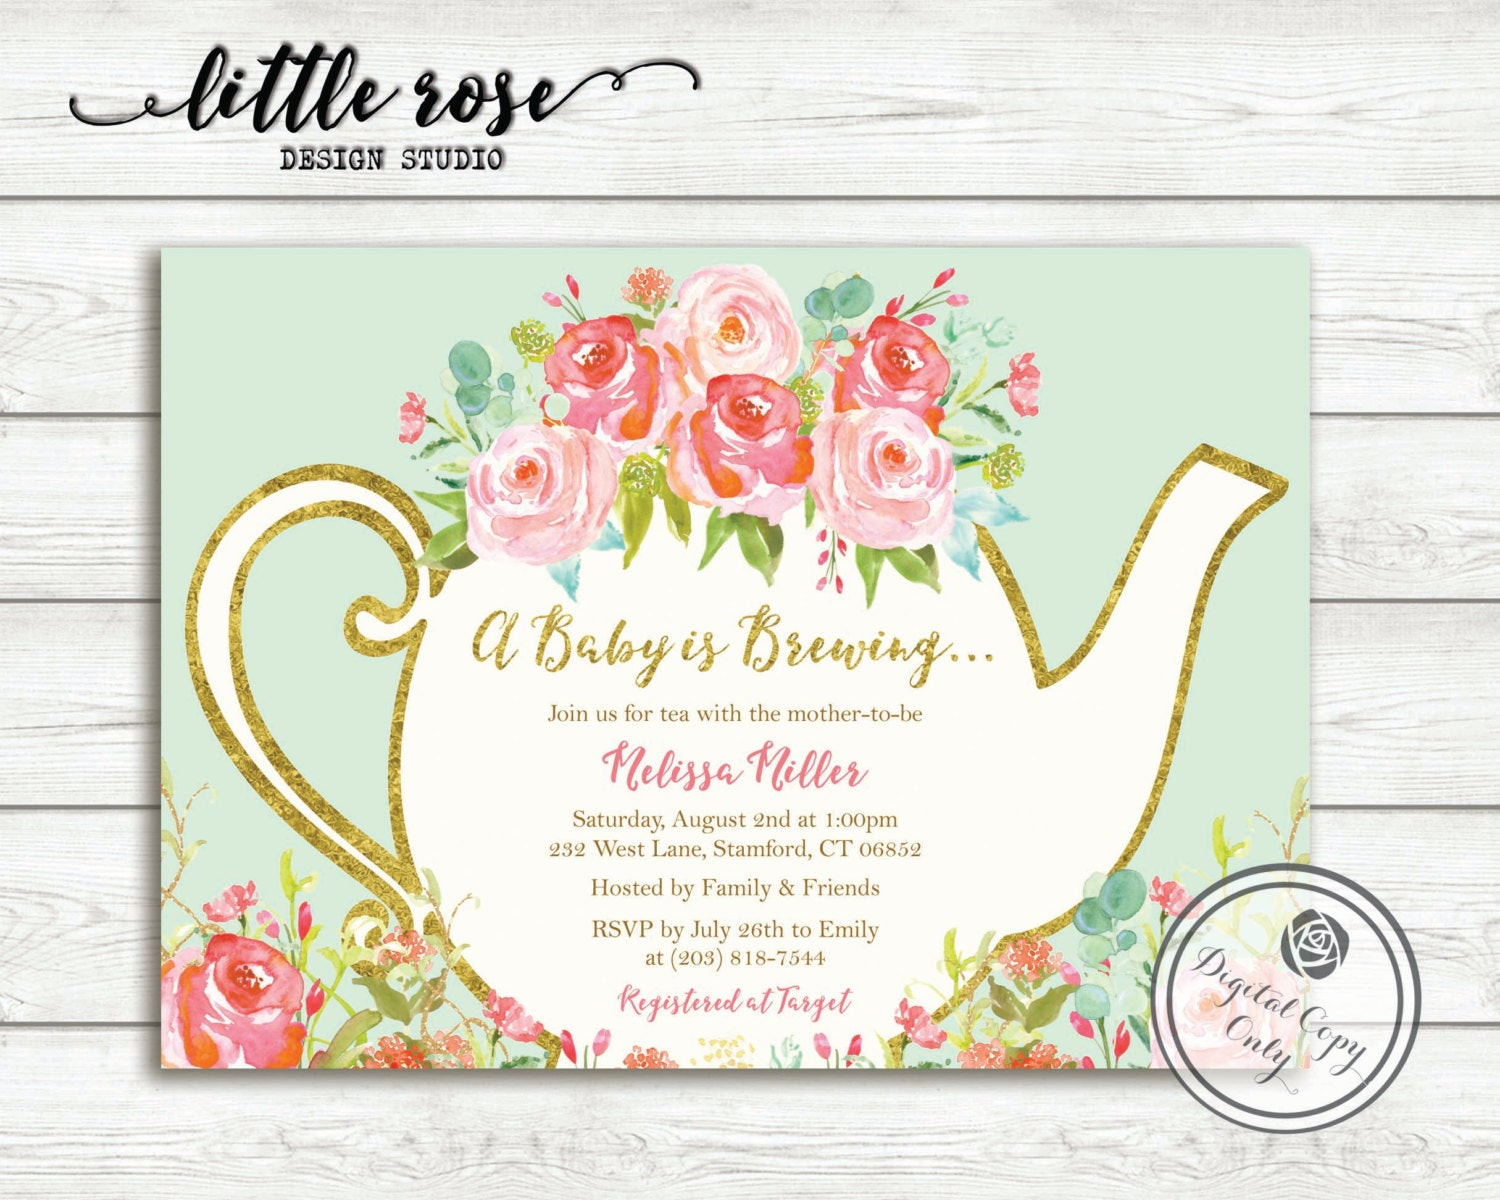 Baby Shower Invitations Tea Party
 A Baby is Brewing Baby Shower Tea Party Invitation Garden